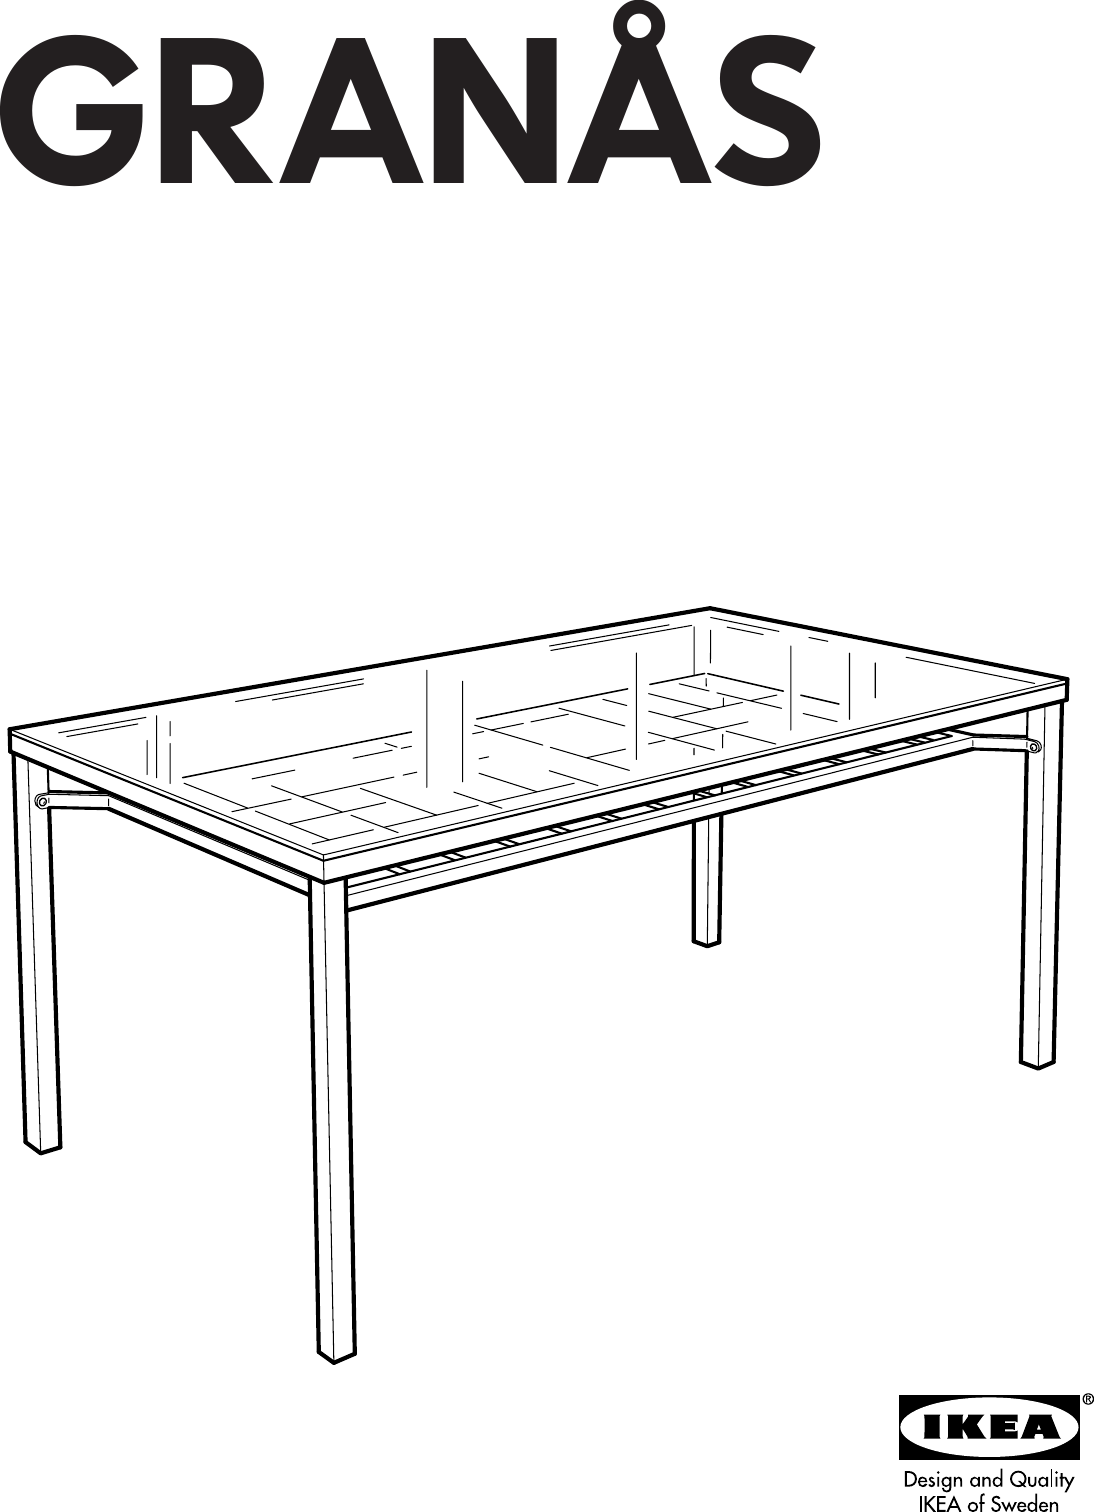 Page 1 of 4 - Ikea Ikea-Granas-Dining-Table-59X31-Assembly-Instruction